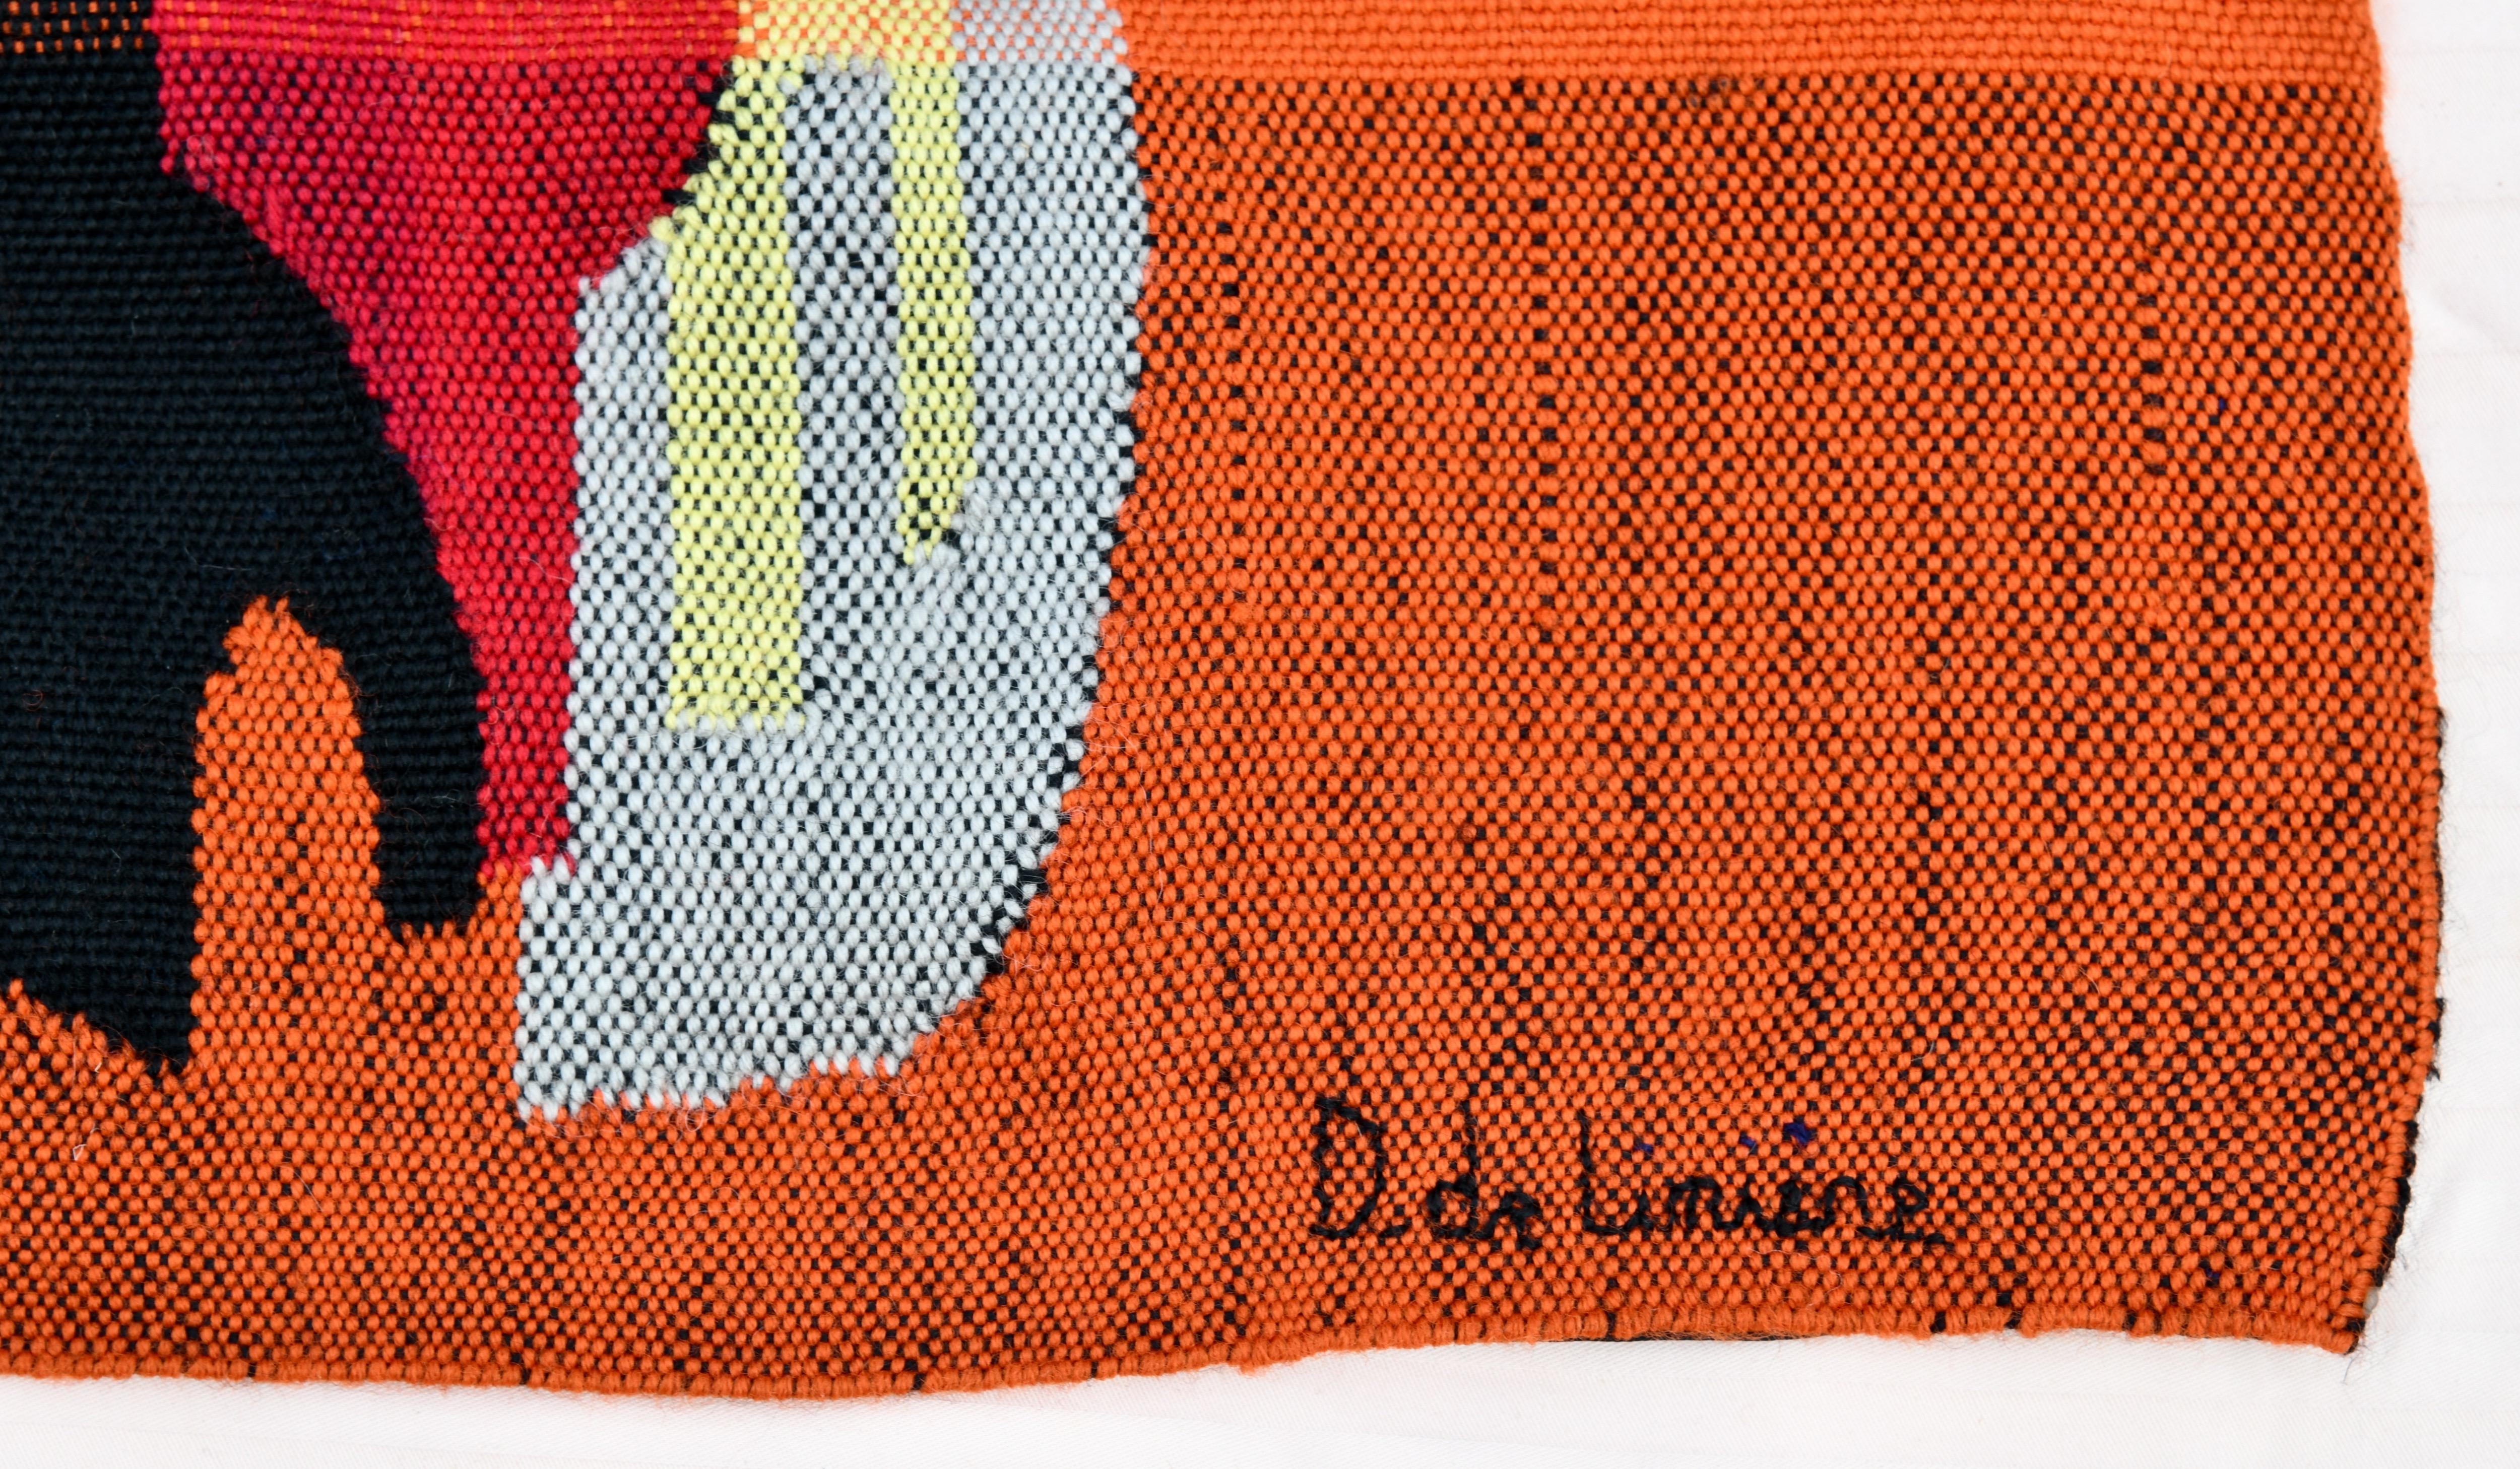 Mid-century unique abstract tapestry runner handwoven by the artist Daniel de Linière, born in France 1925). This work is entitled 